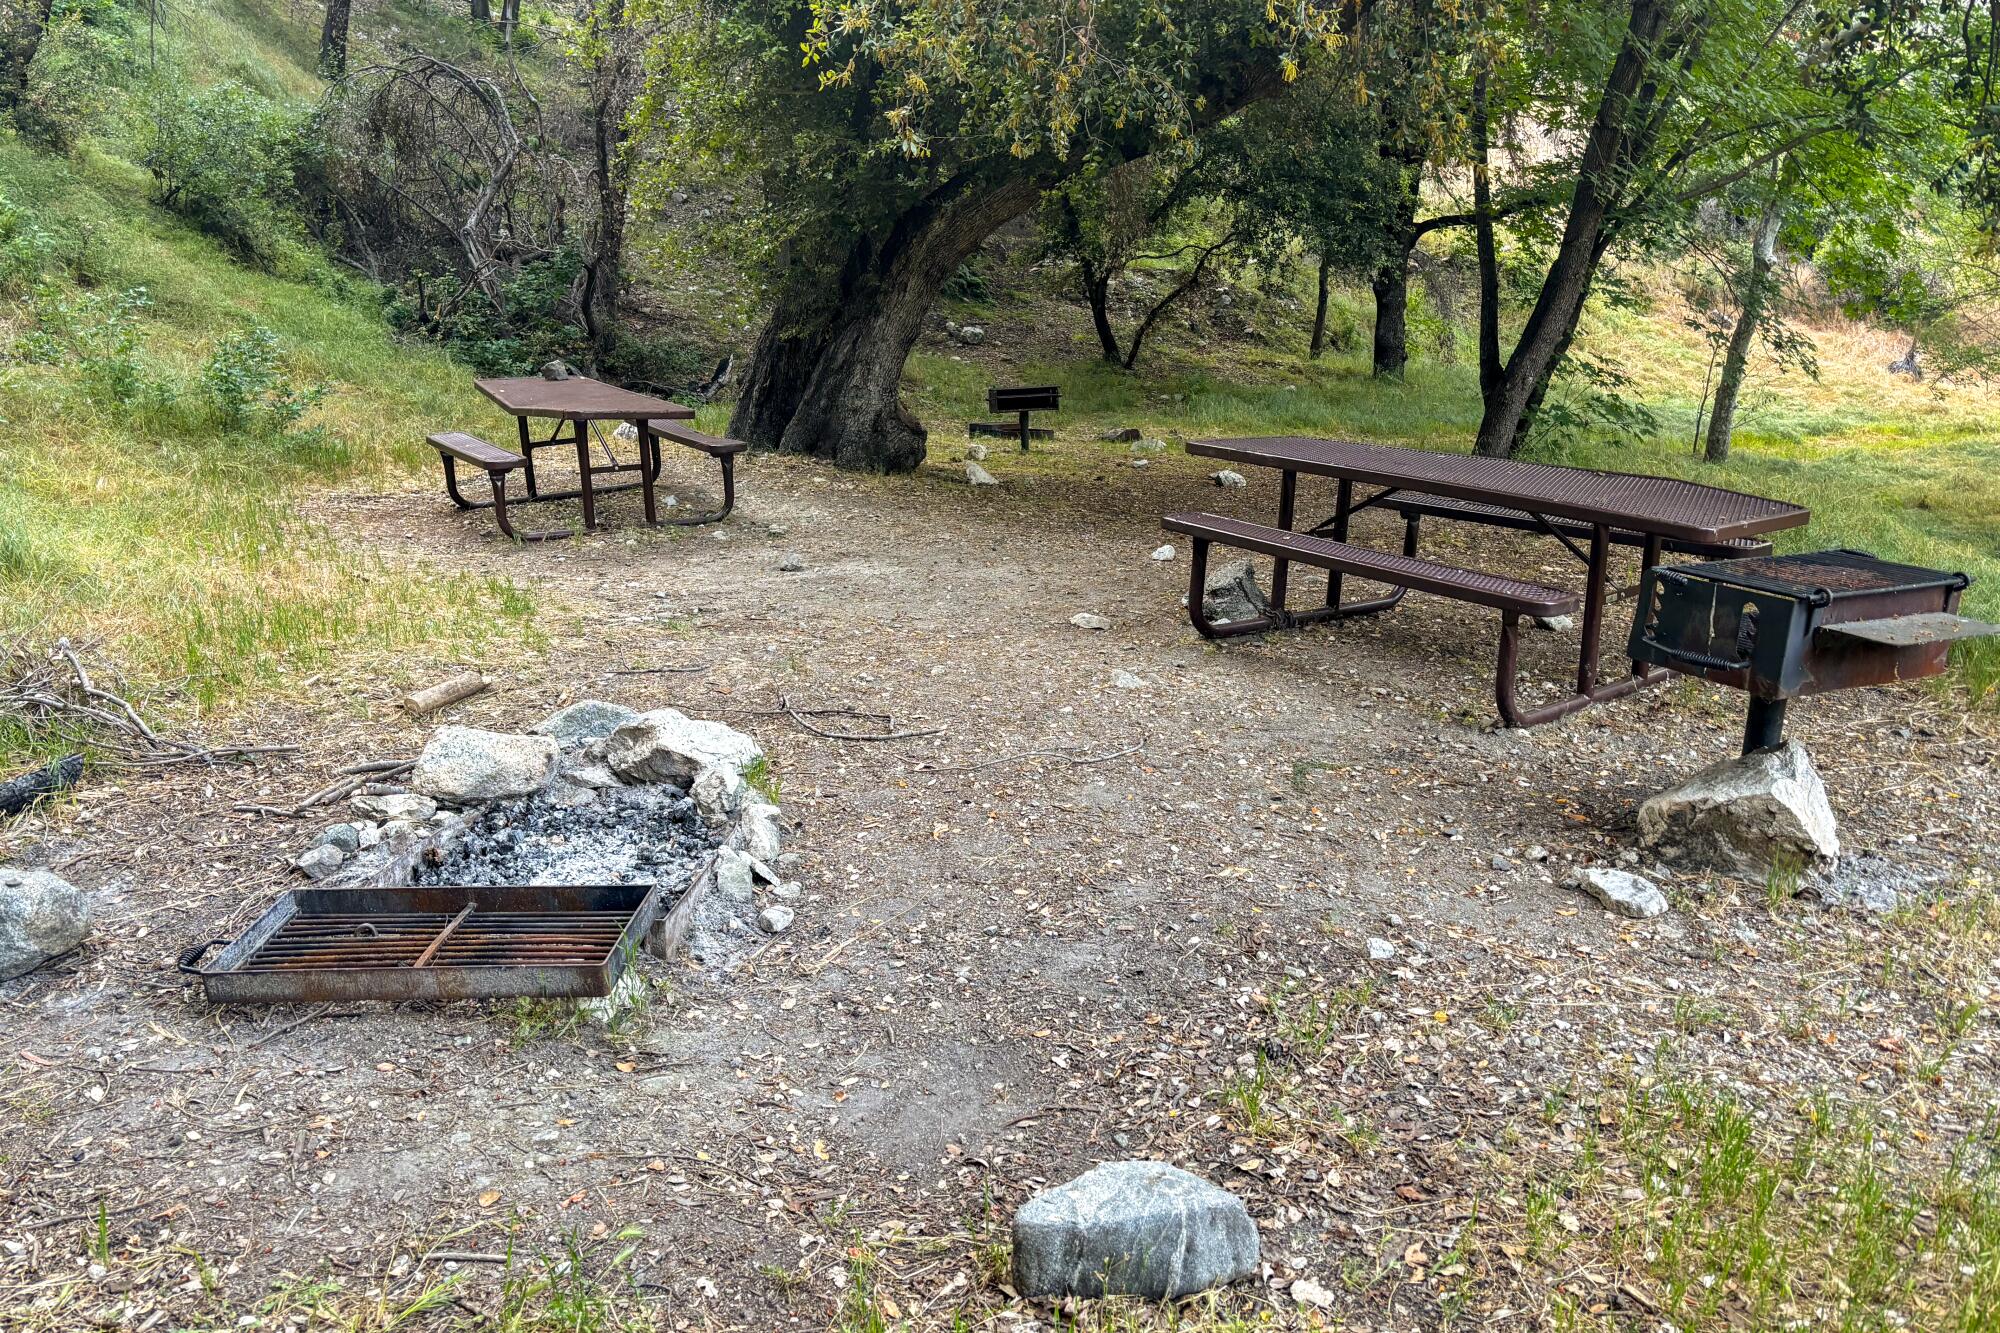 Picnic tables and a campfire grate ready to be enjoyed in a remote campground